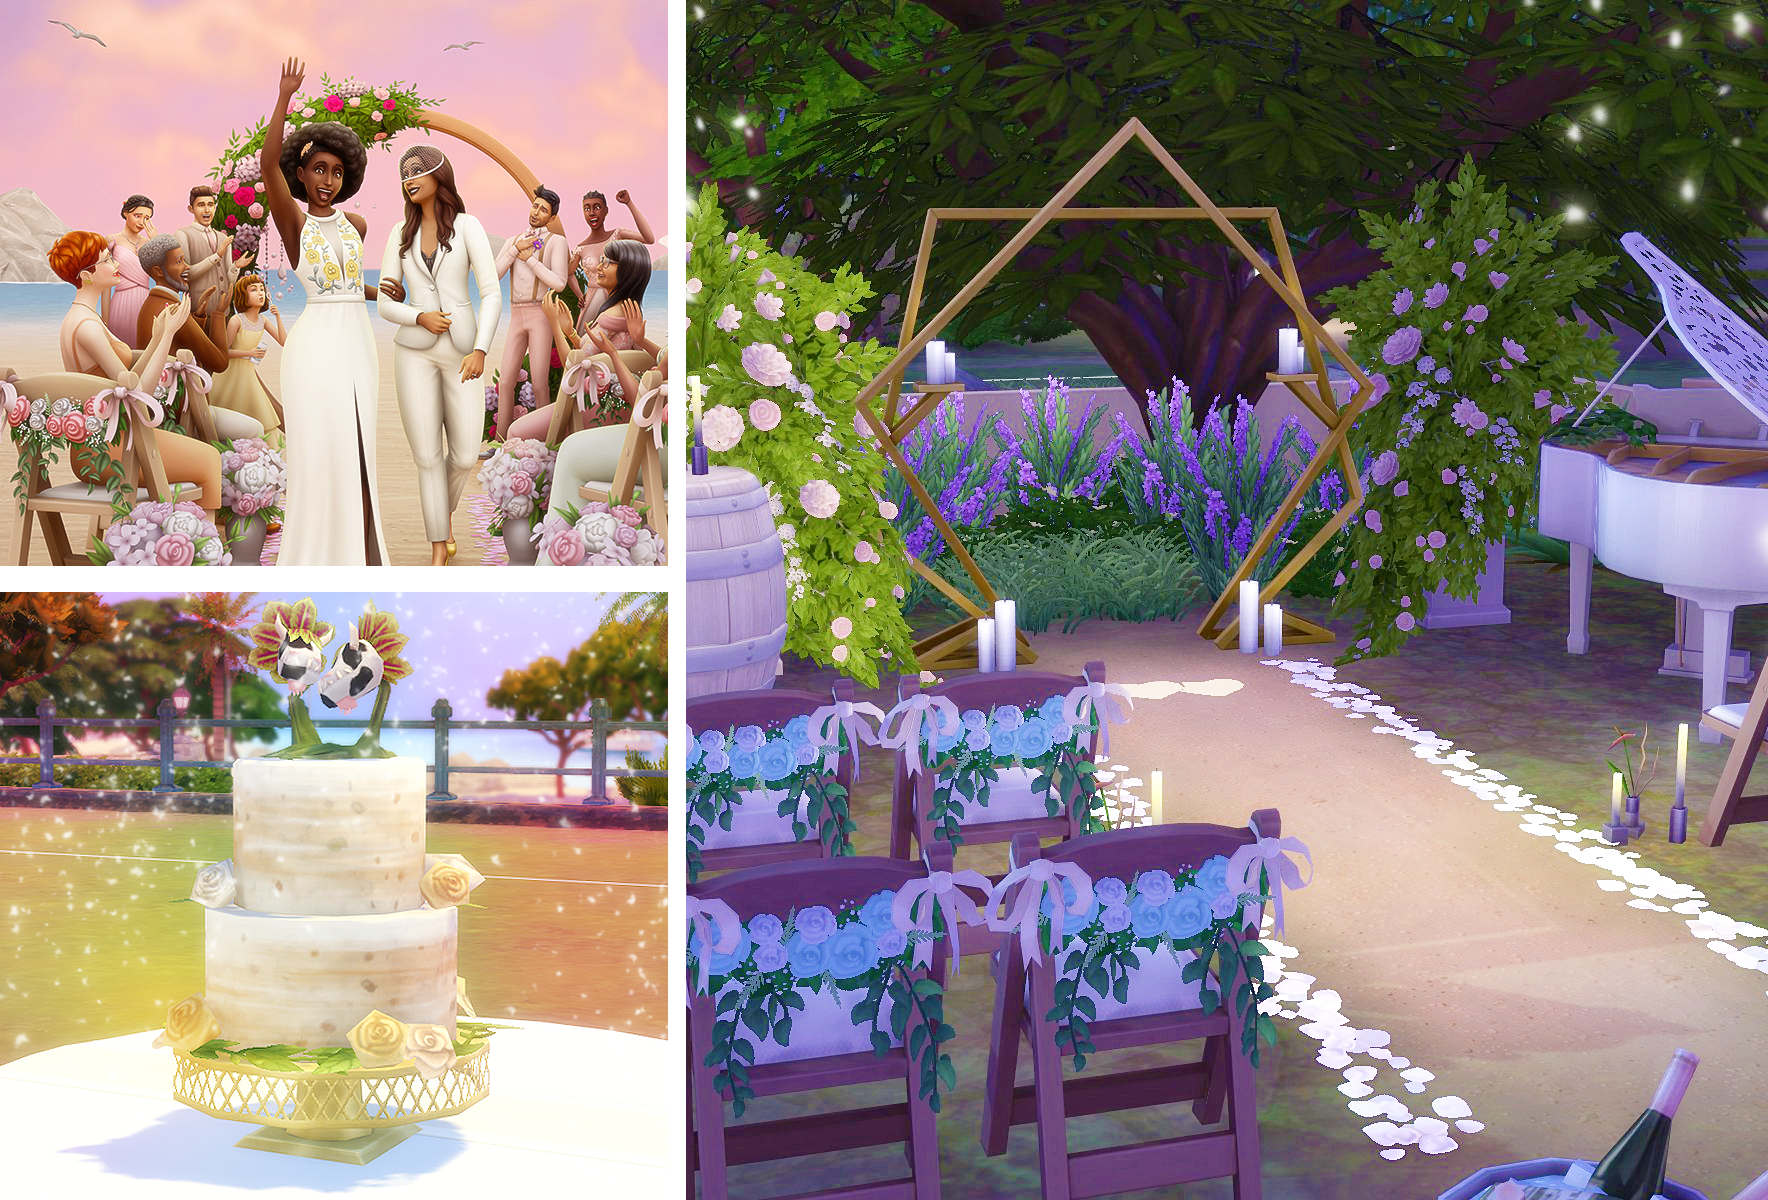 Sims 4 My Wedding Stories Review